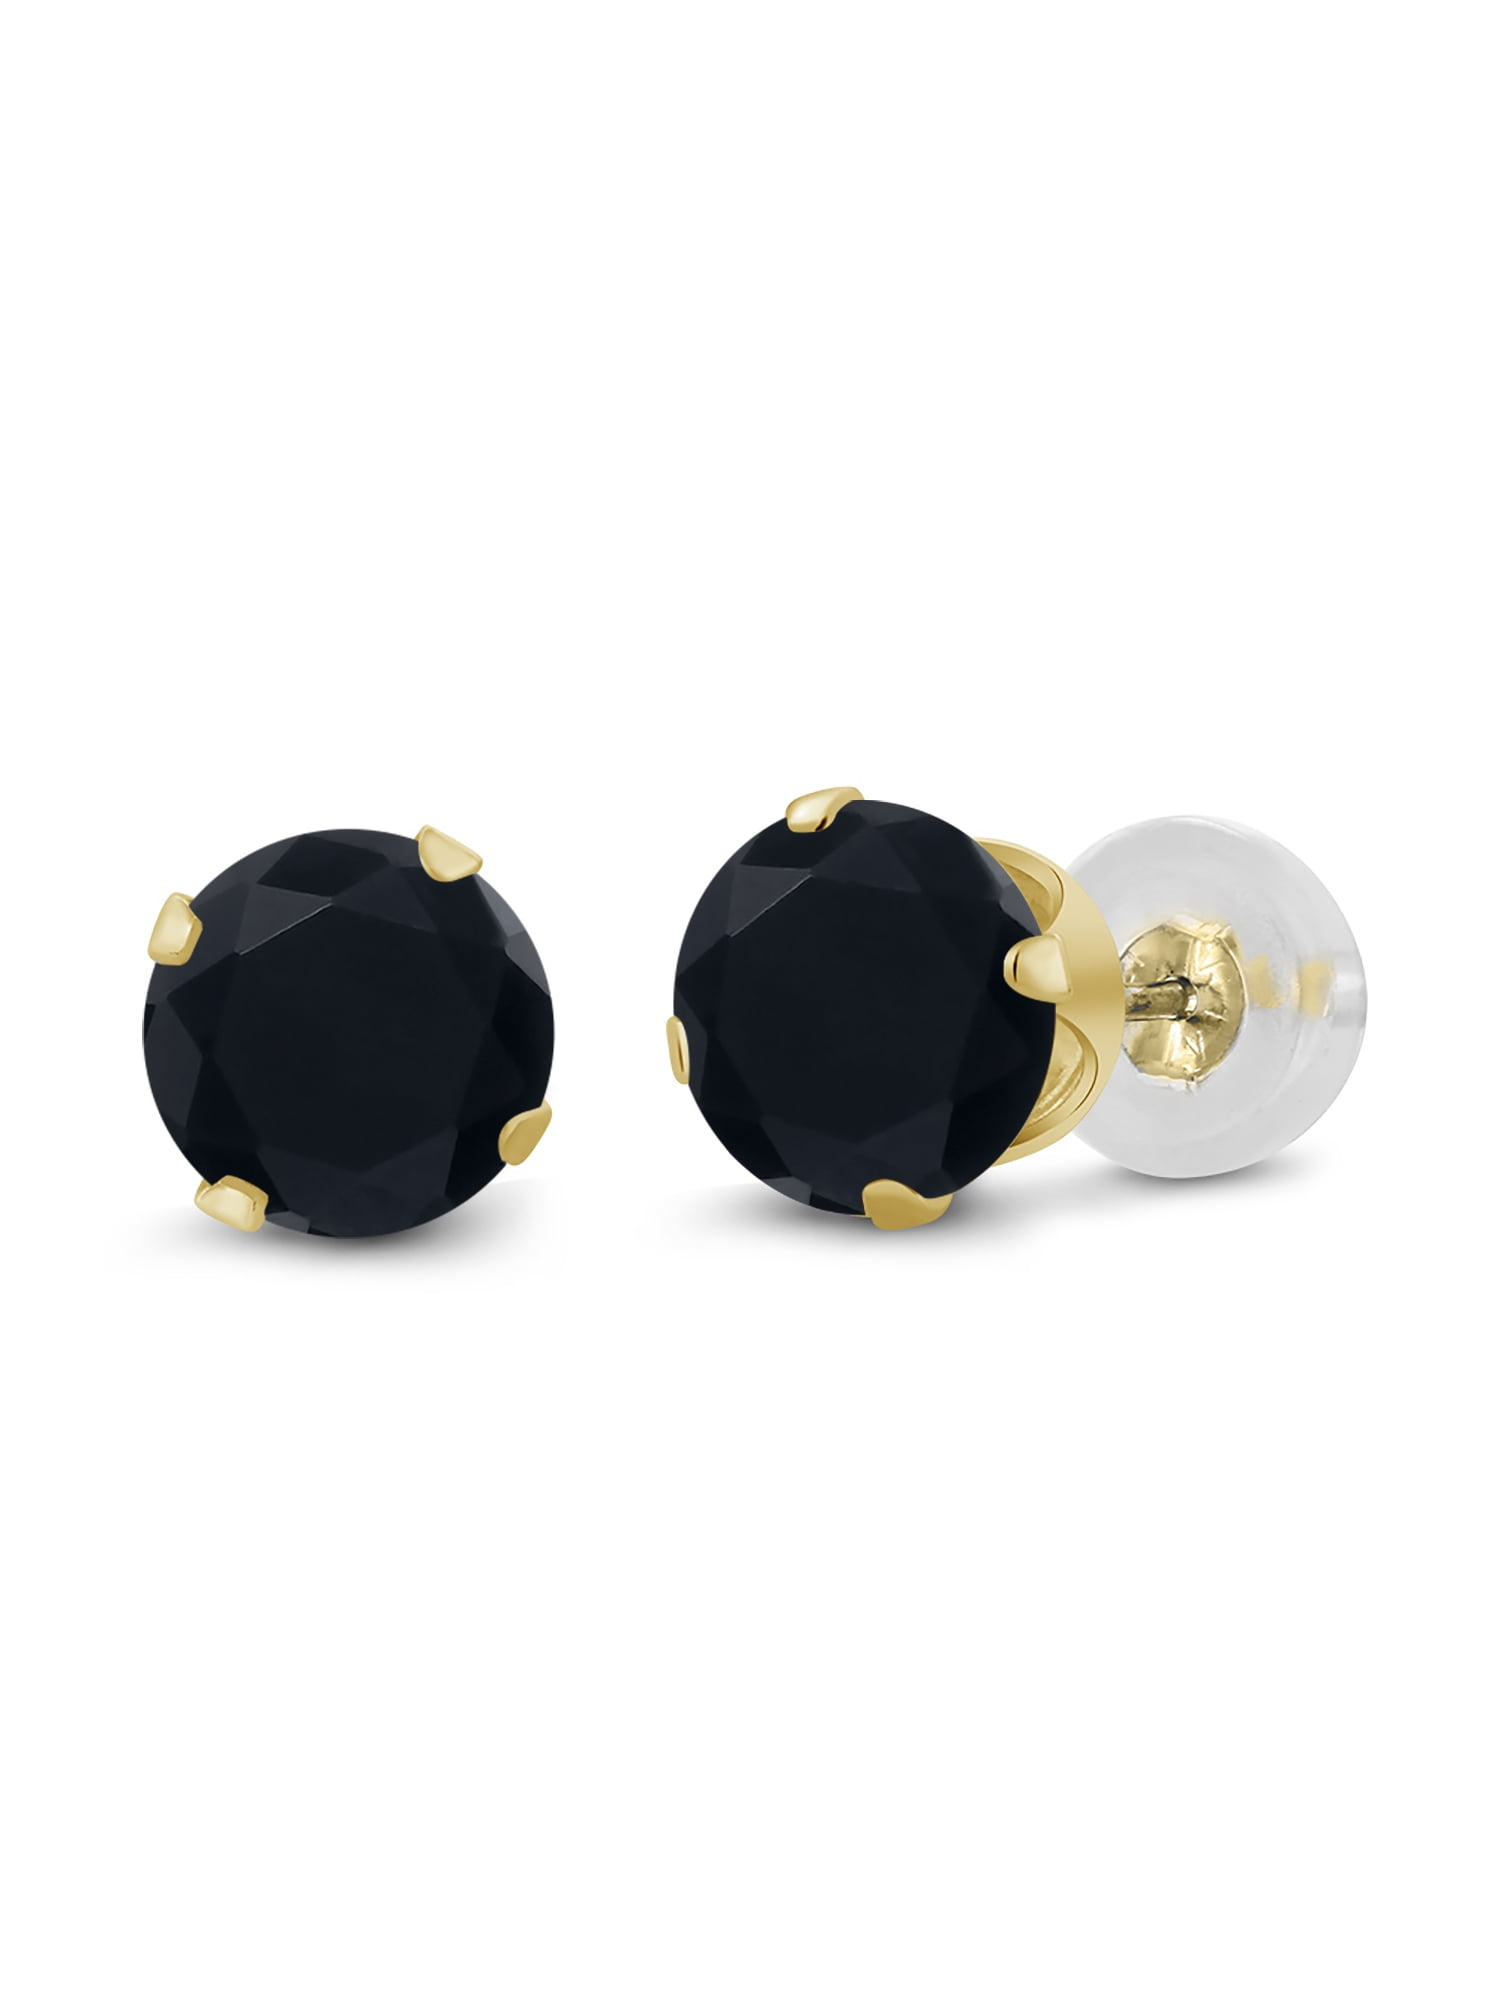 Details about   Real 14kt Yellow Gold Onyx with U Threader Earrings